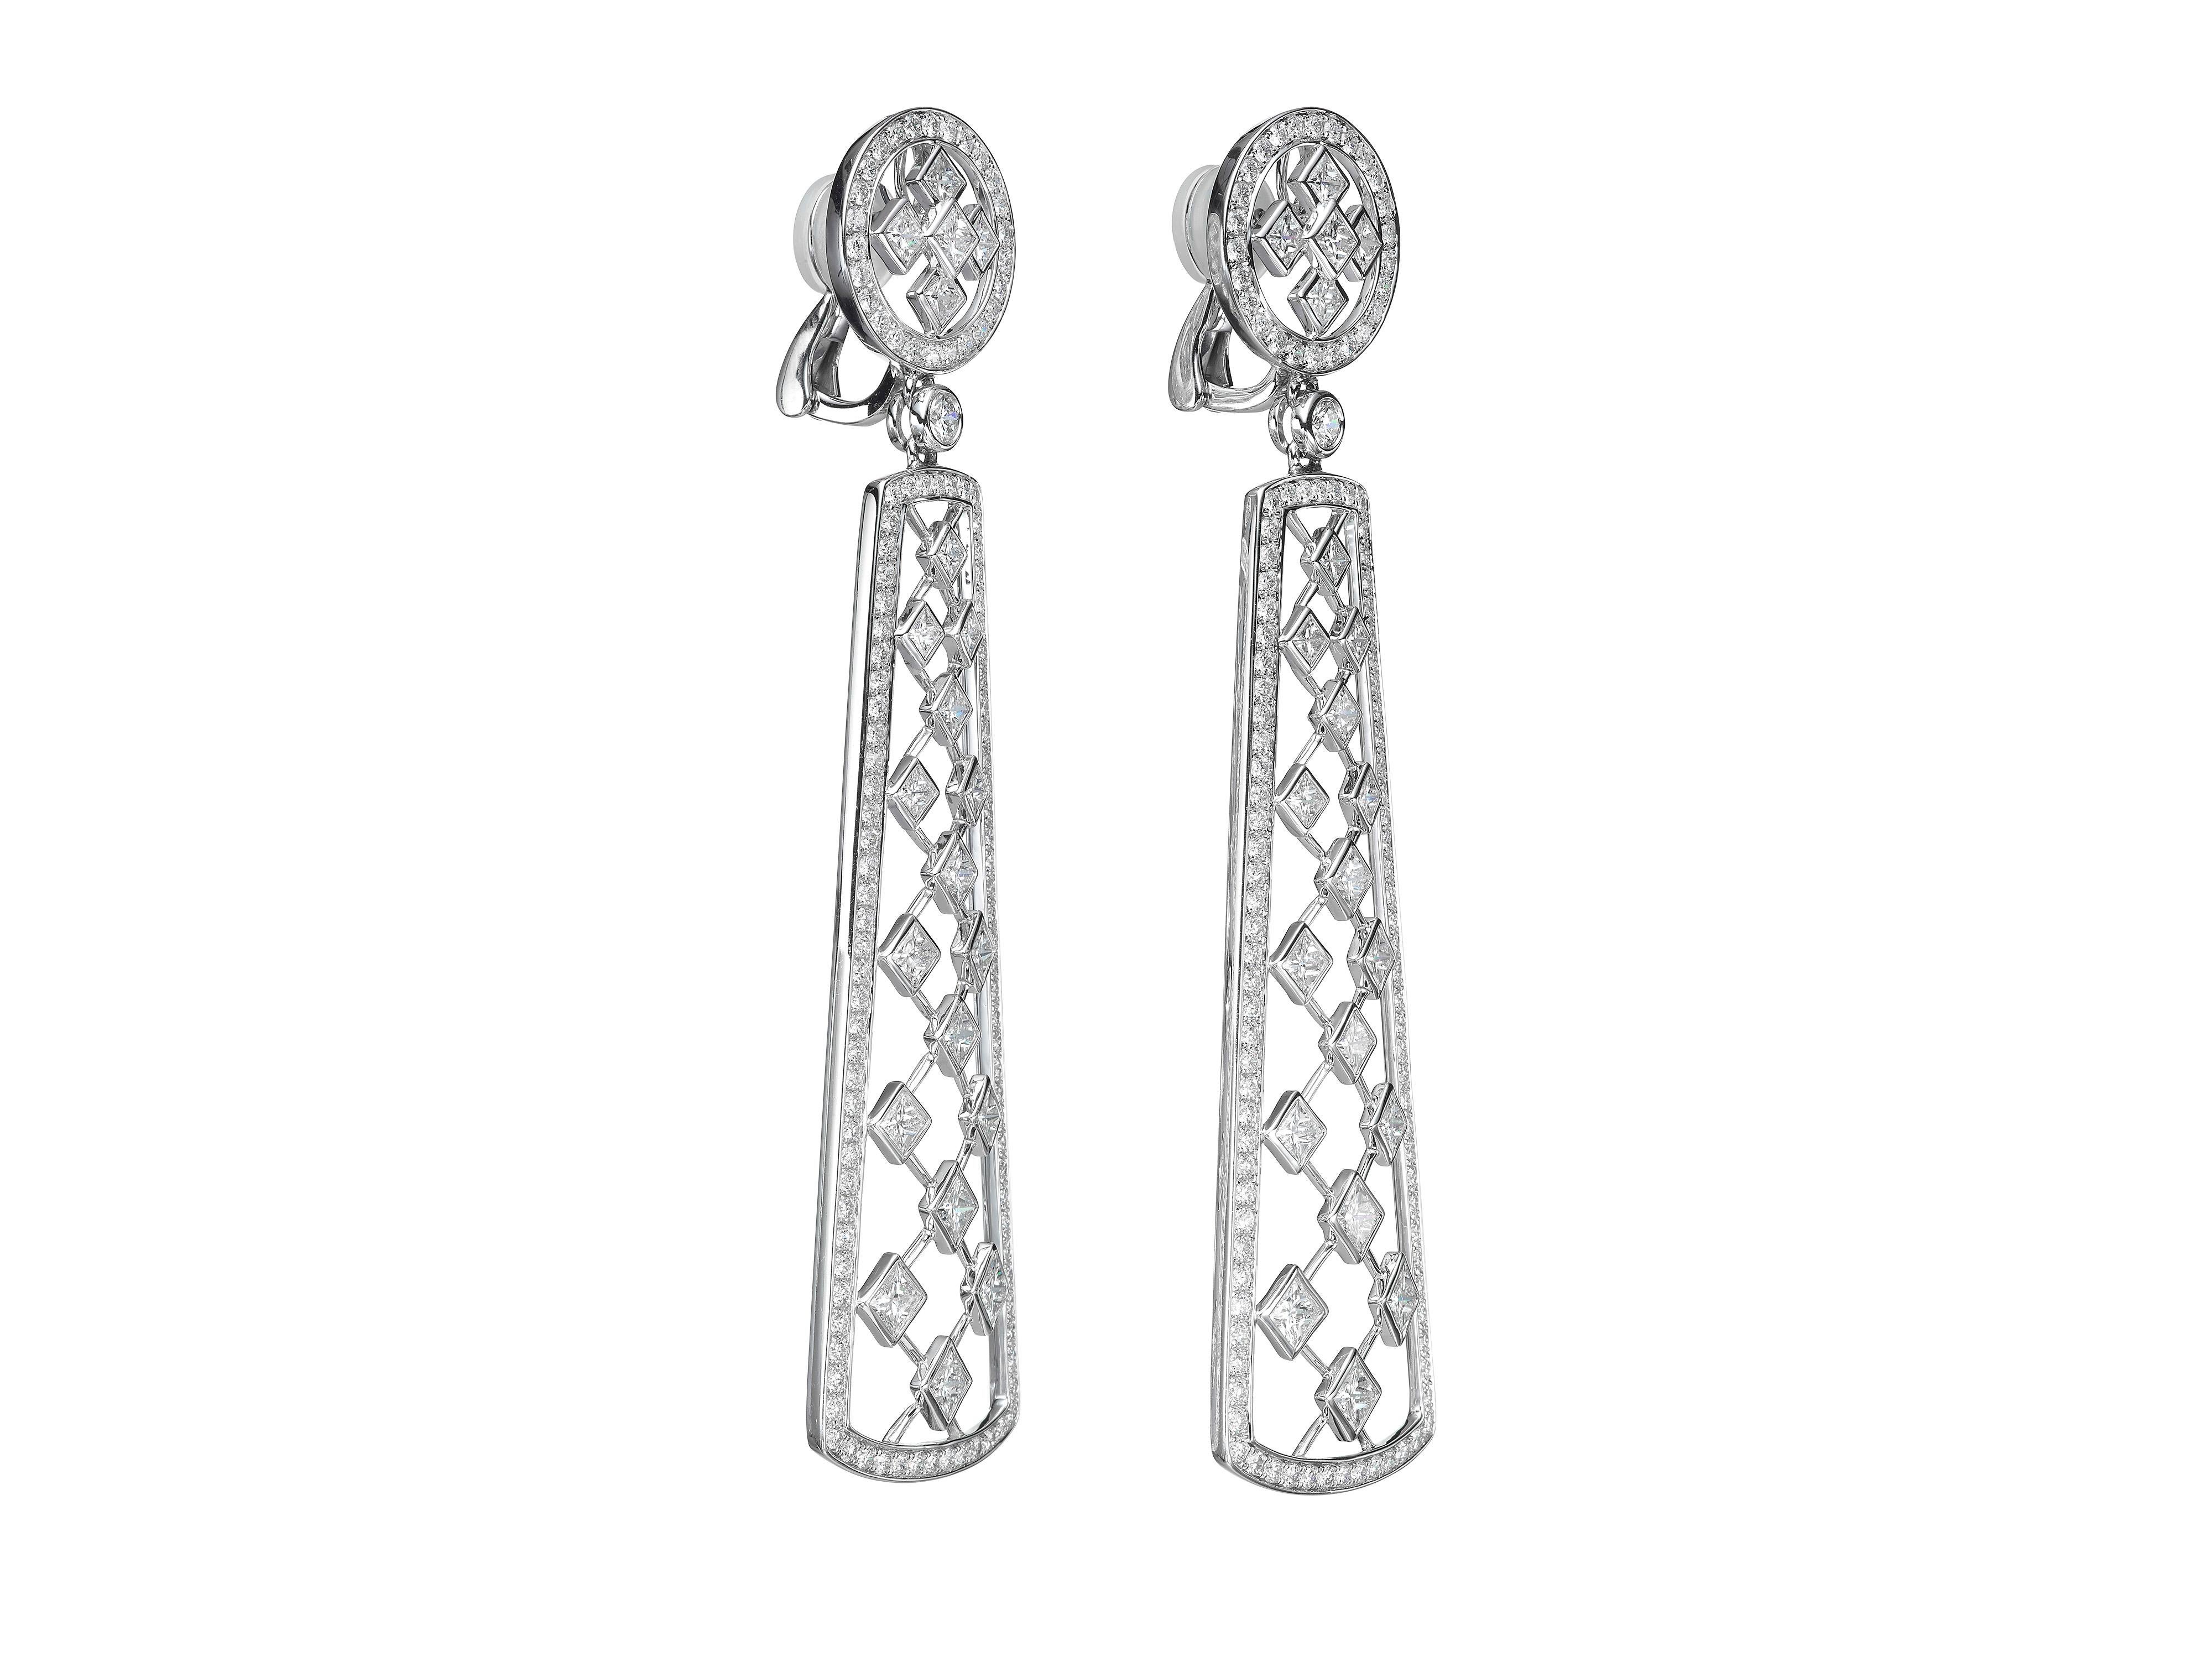 Handmade in 18K white old, Butani's earrings are designed with latticed princess-cut diamonds (totaling 6.64 carats) set in a rectangular drop silhouette of brilliant-cut diamonds (totaling 3.87 carats).  

Composition: 
18K White Gold 
42 Princess